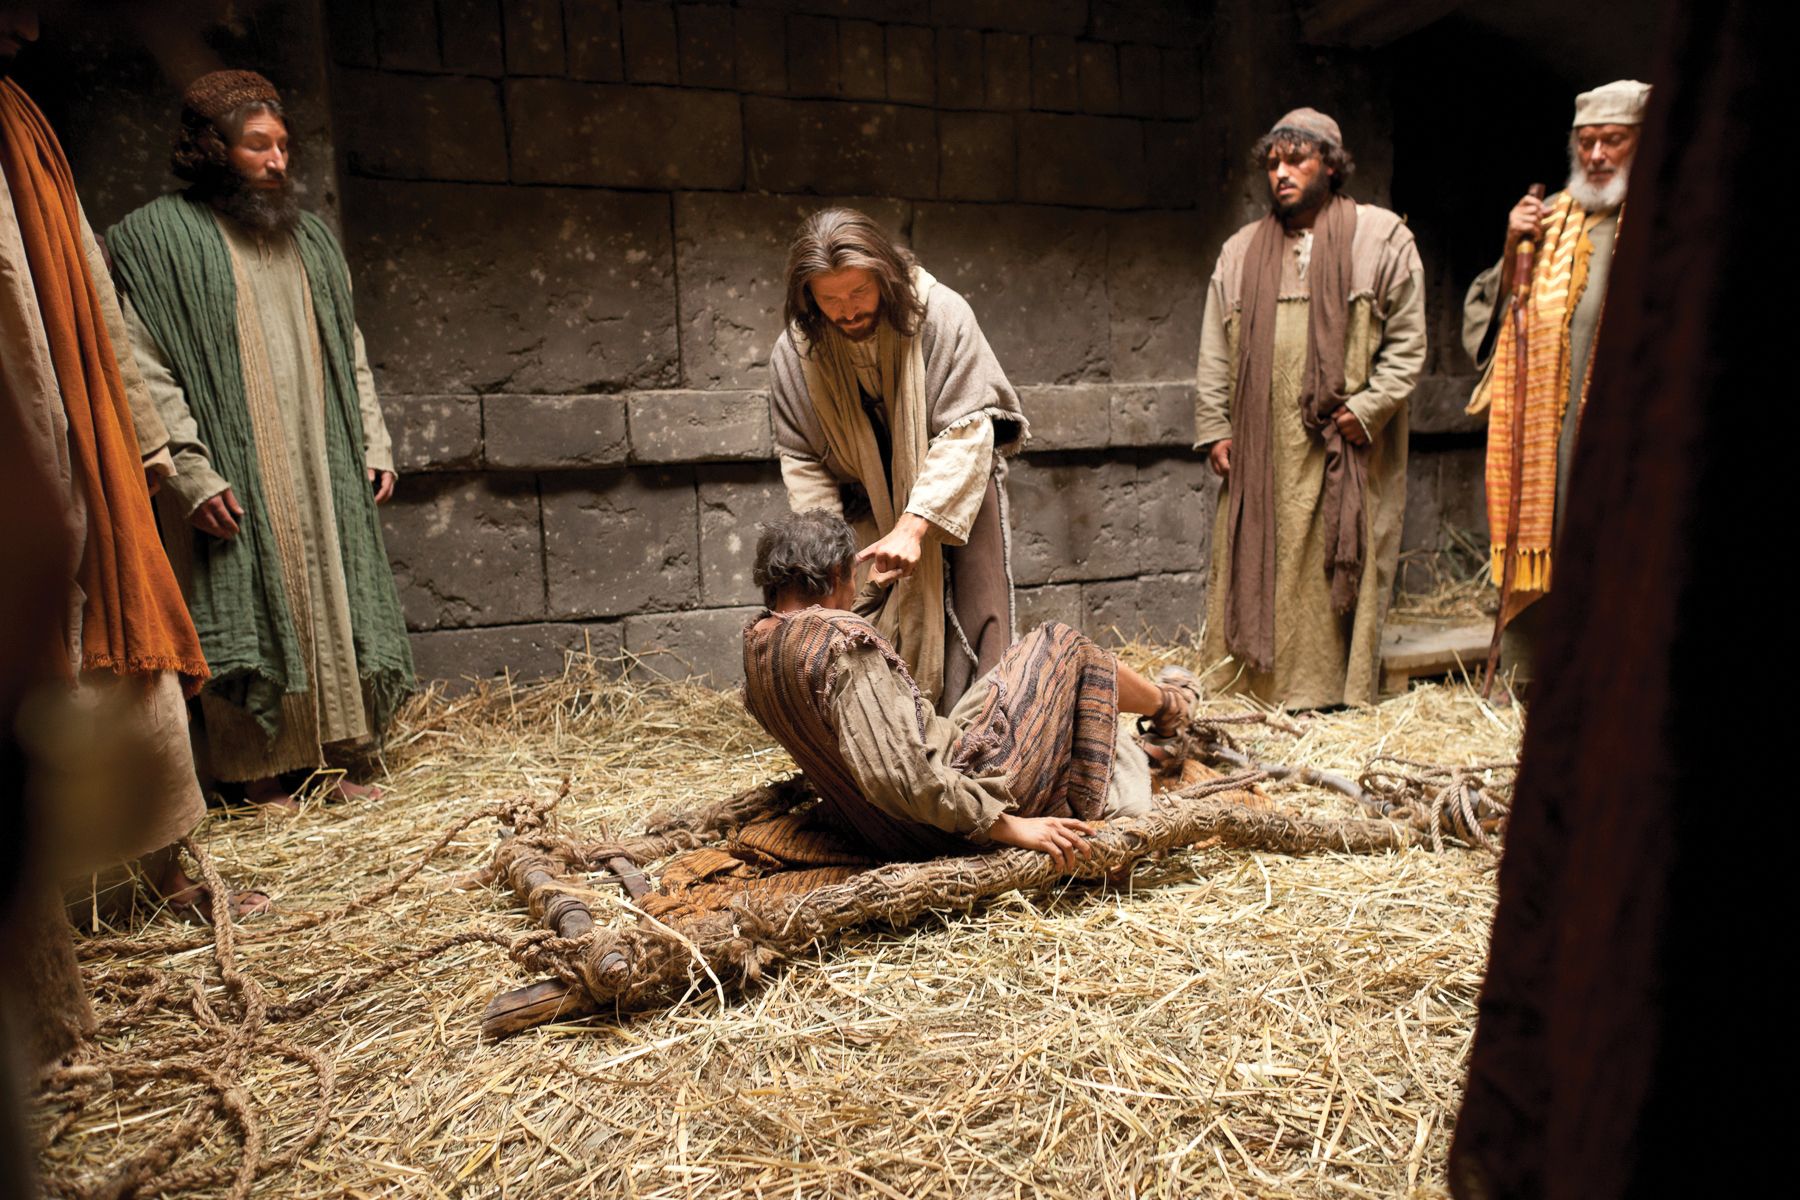 Jesus forgives the sins of the man stricken with palsy and heals him.